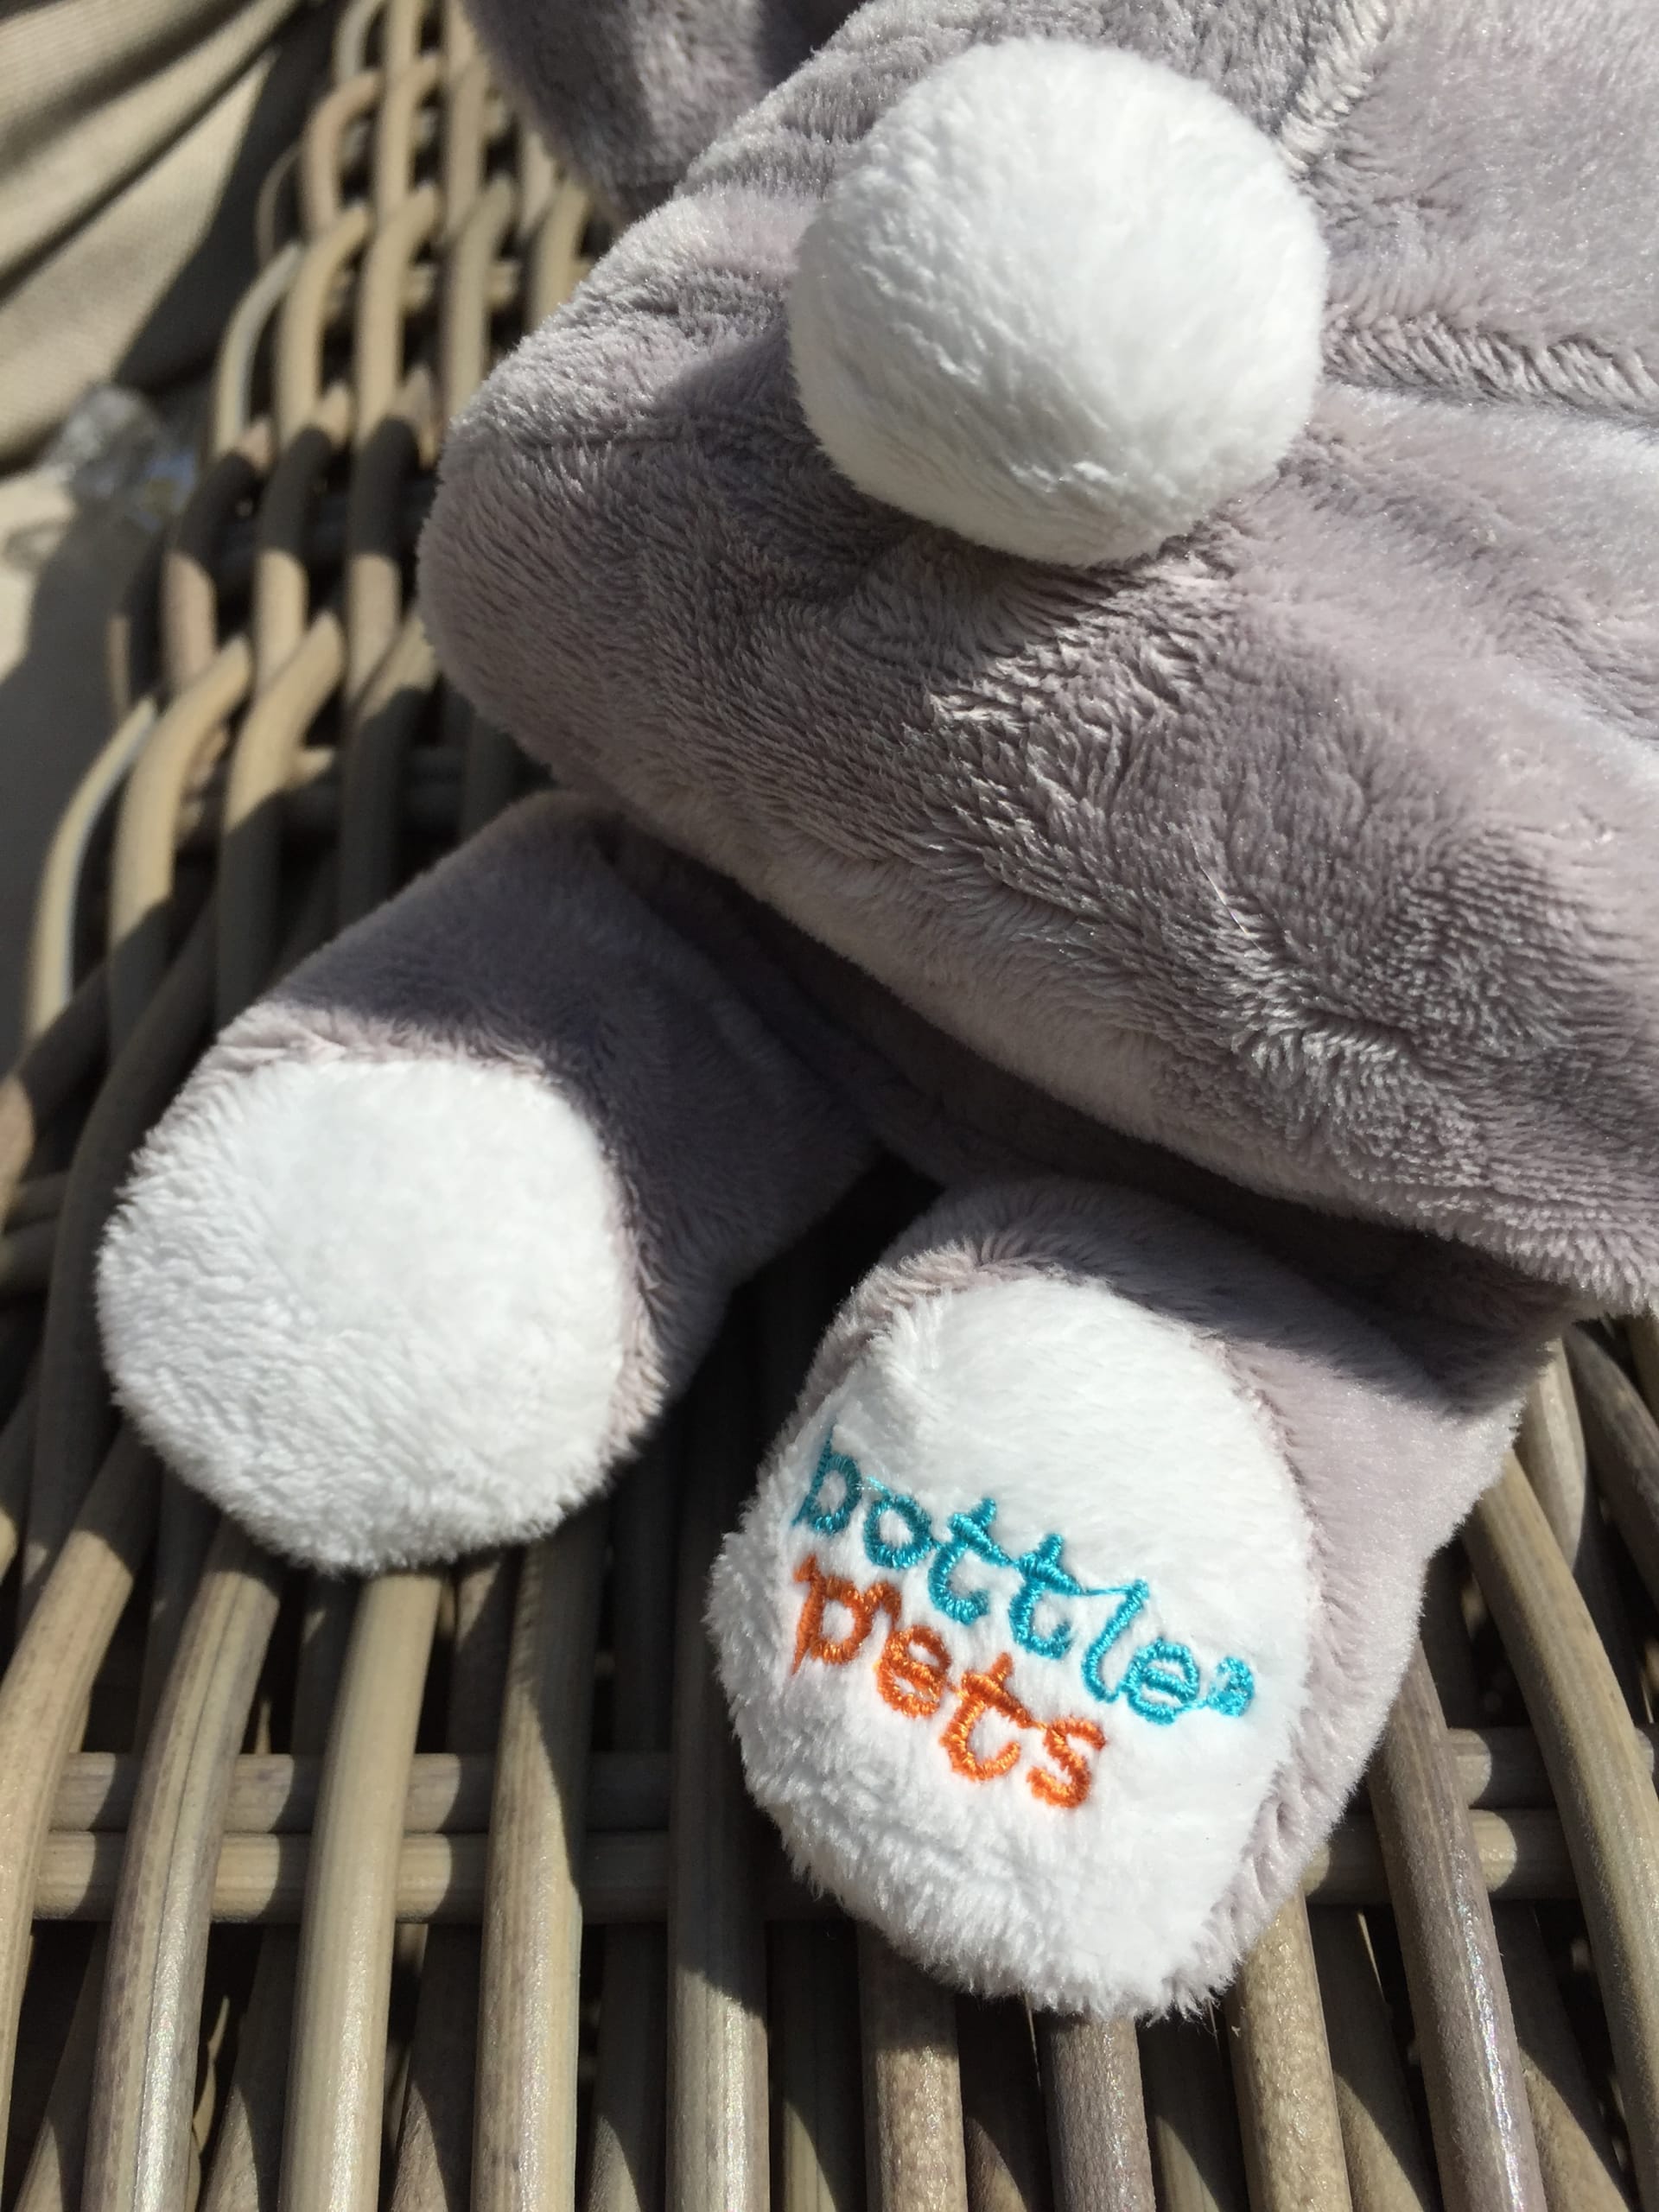 A Bottle Pet plushing with the logo embroidered on its foot.